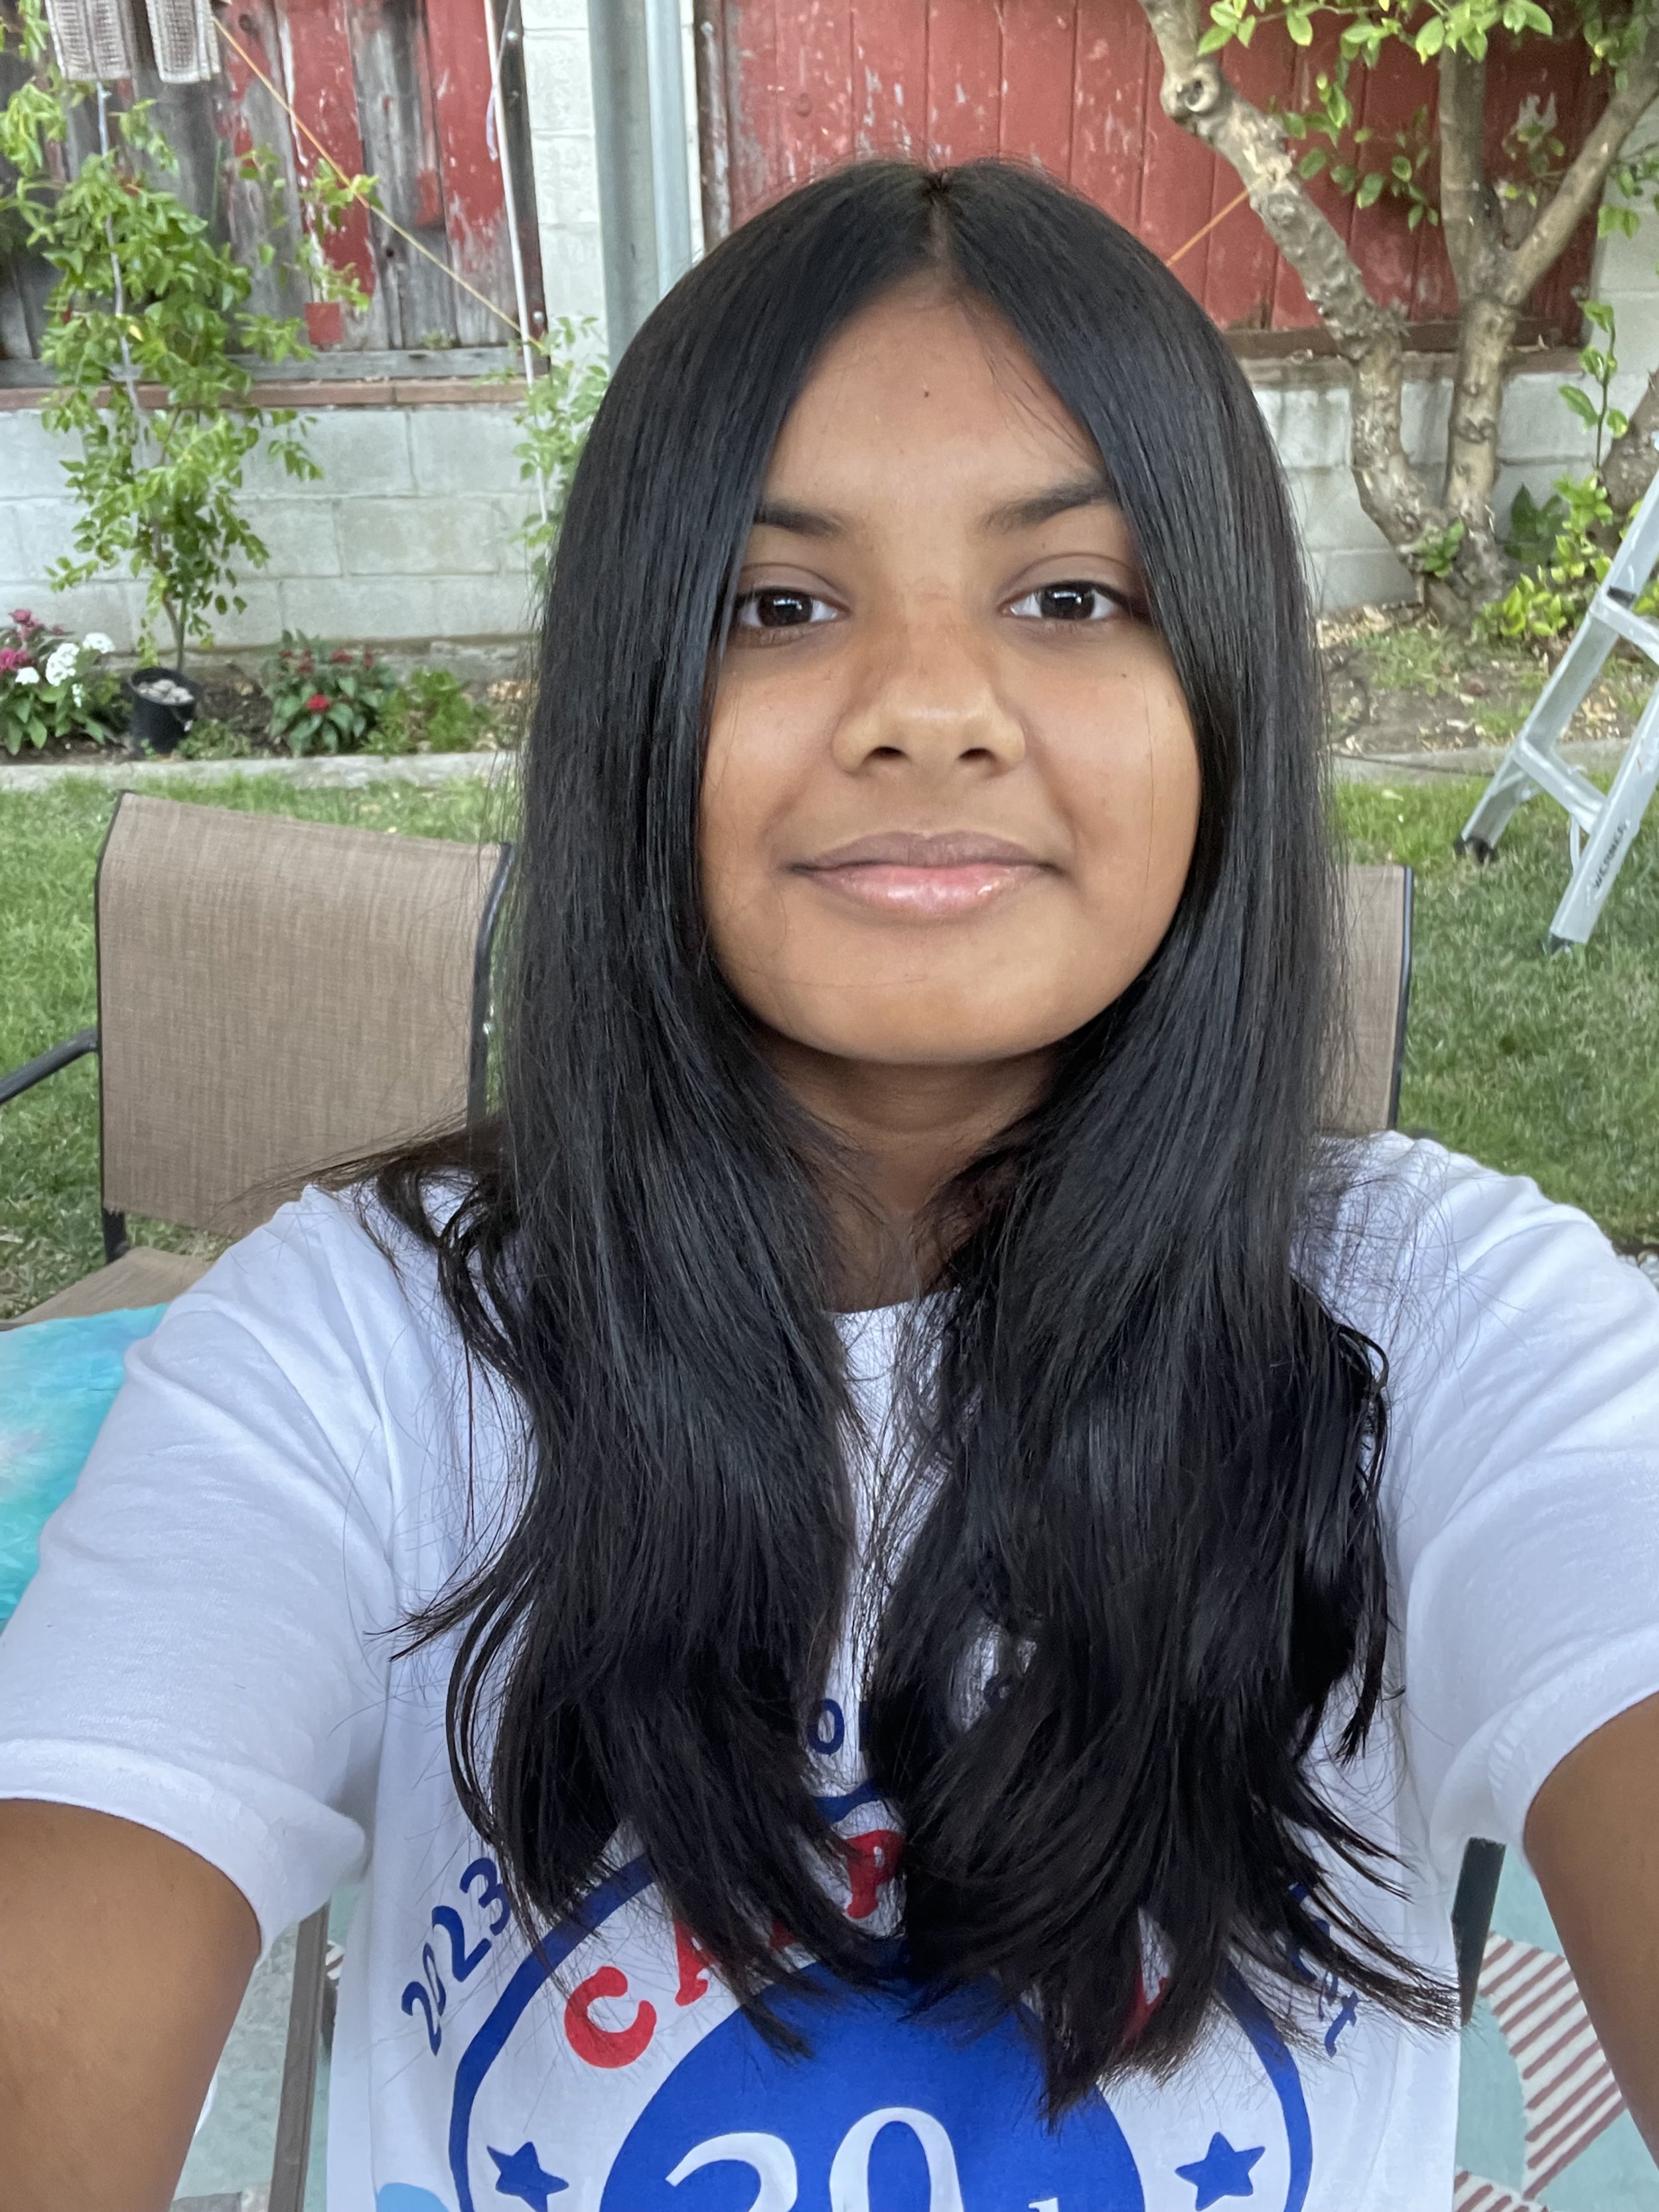  Hey Hornets!! I'm Kushi Arun and I'm in the Spirit commission. I can’t wait to meet you all this school year. I like to bake, hang out with friends, and swim. Some things I like about Horner are the socials and the people. I look forward to increasi